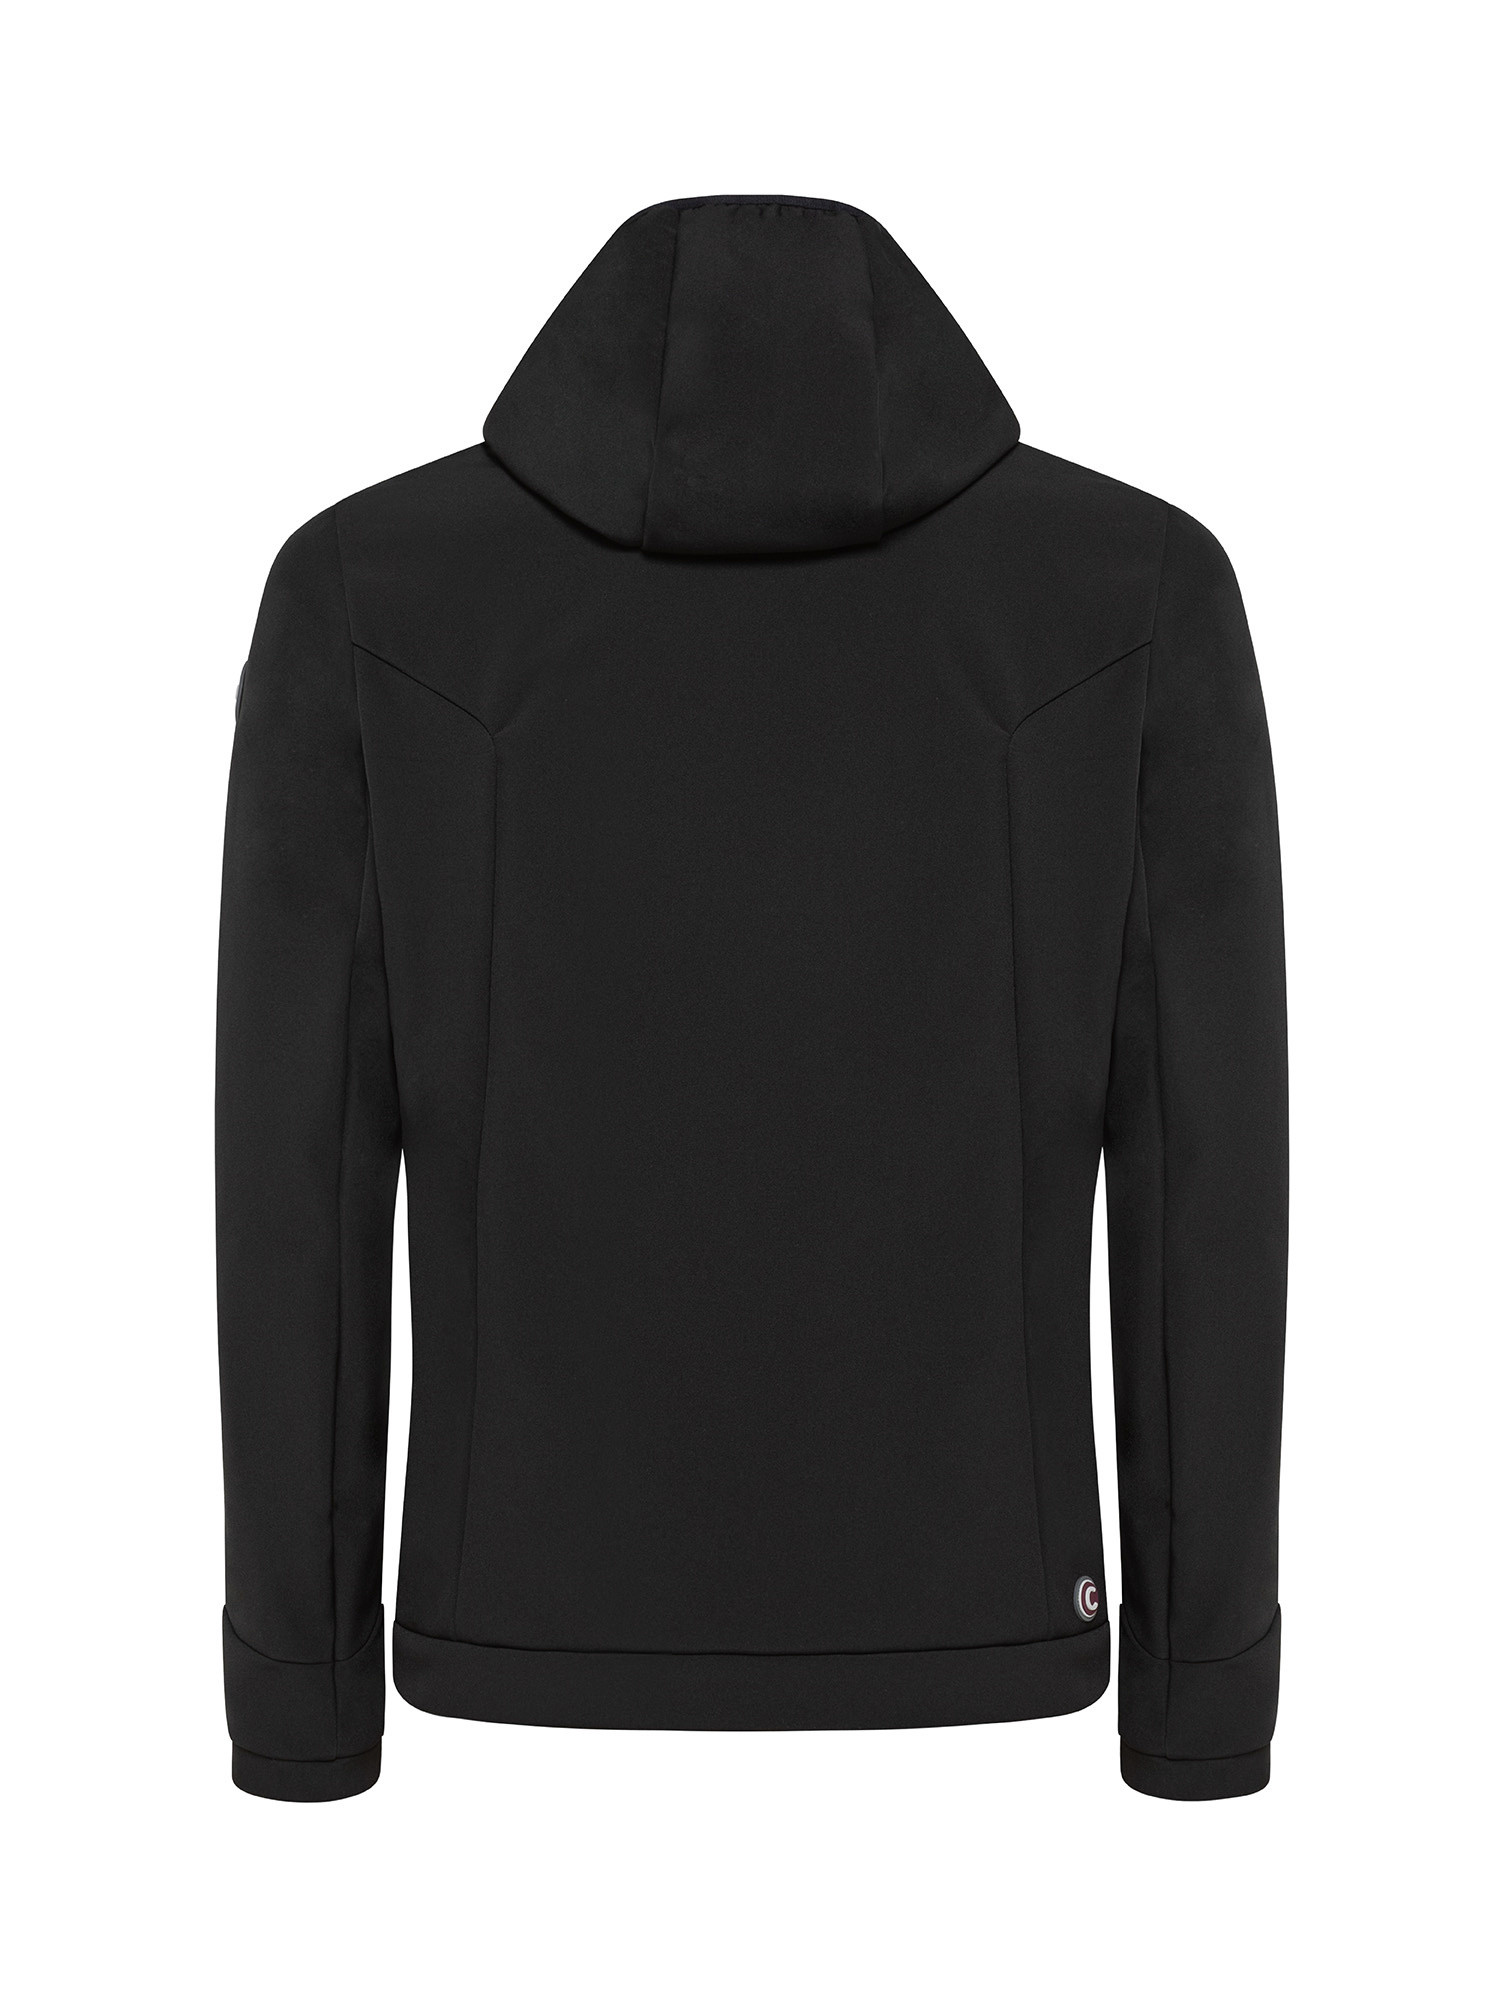 Hoodie jacket in soft three-layer fabric, Black, large image number 1